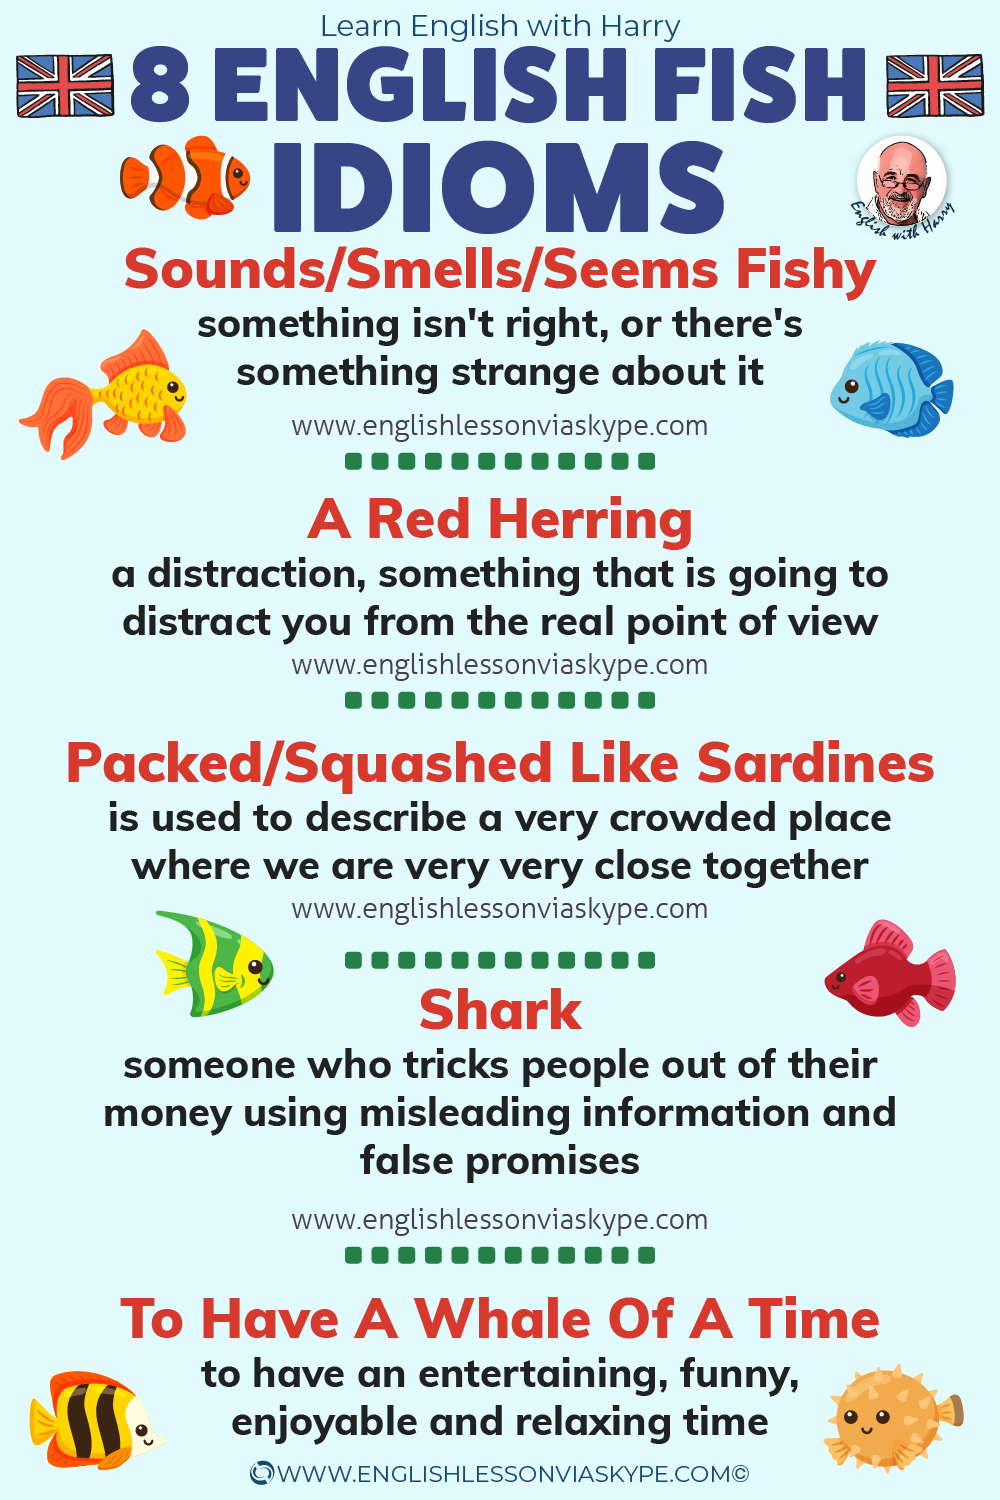 English Fish Idioms And Phrases • Learn English with Harry 👴